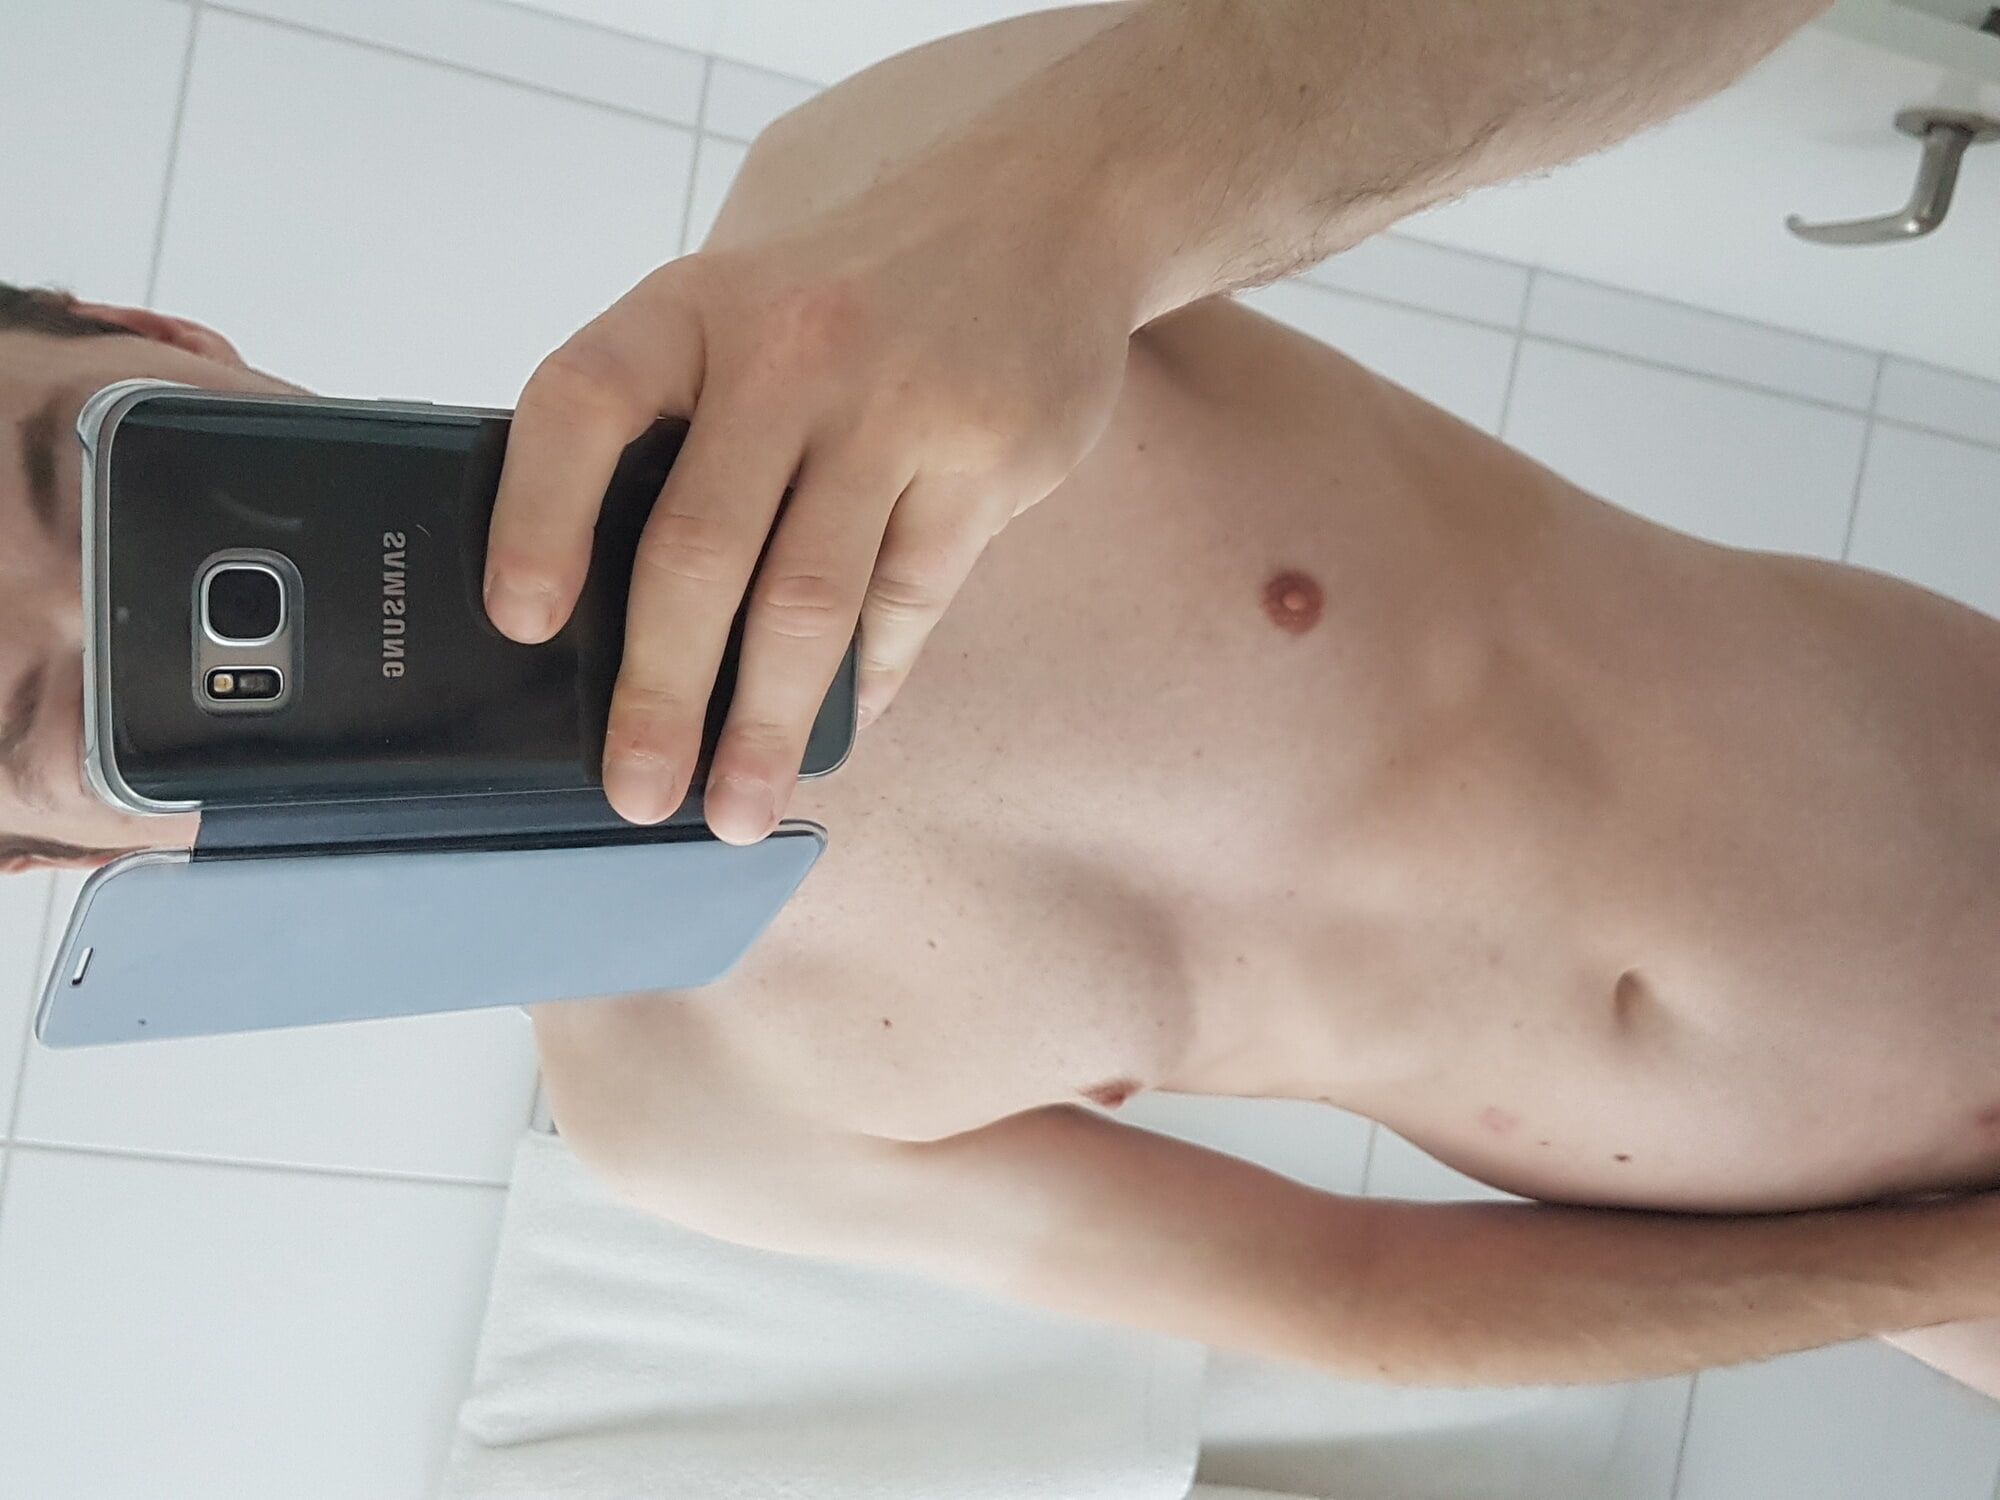 Some more pics of me - cock and body (older and newer ones) #9